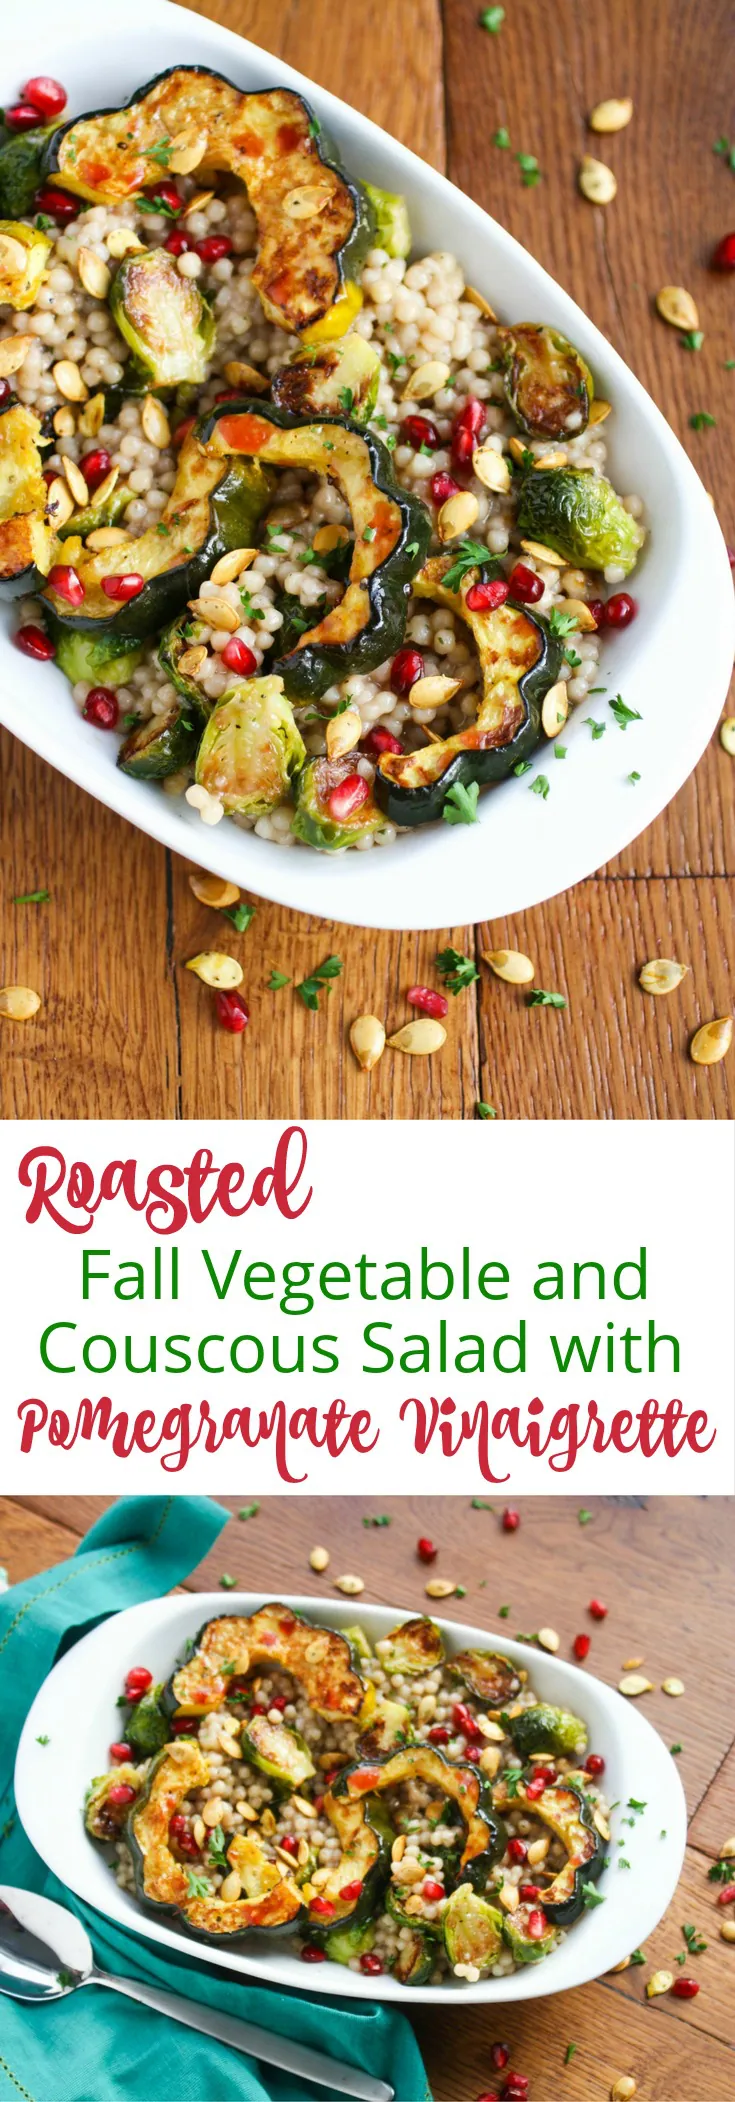 Roasted Fall Vegetable and Couscous Salad with Pomegranate Vinaigrette is a tasty and seasonal side. You'll love this side dish for a seasonal treat.